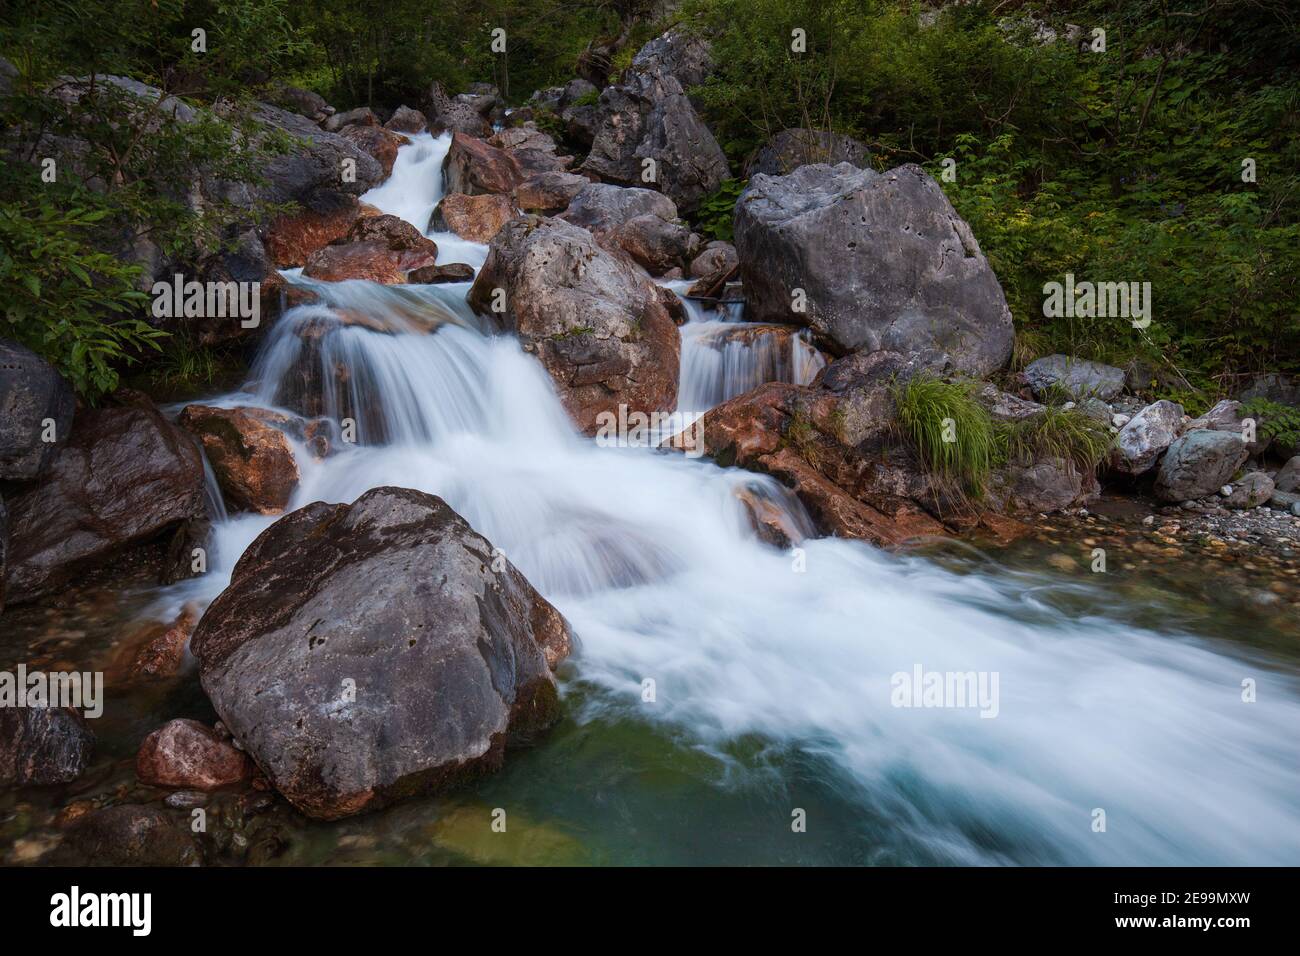 A beautiful mountain stream from the Carnic Alps with icy clear blue green water surrounded by large rocks. Stock Photo